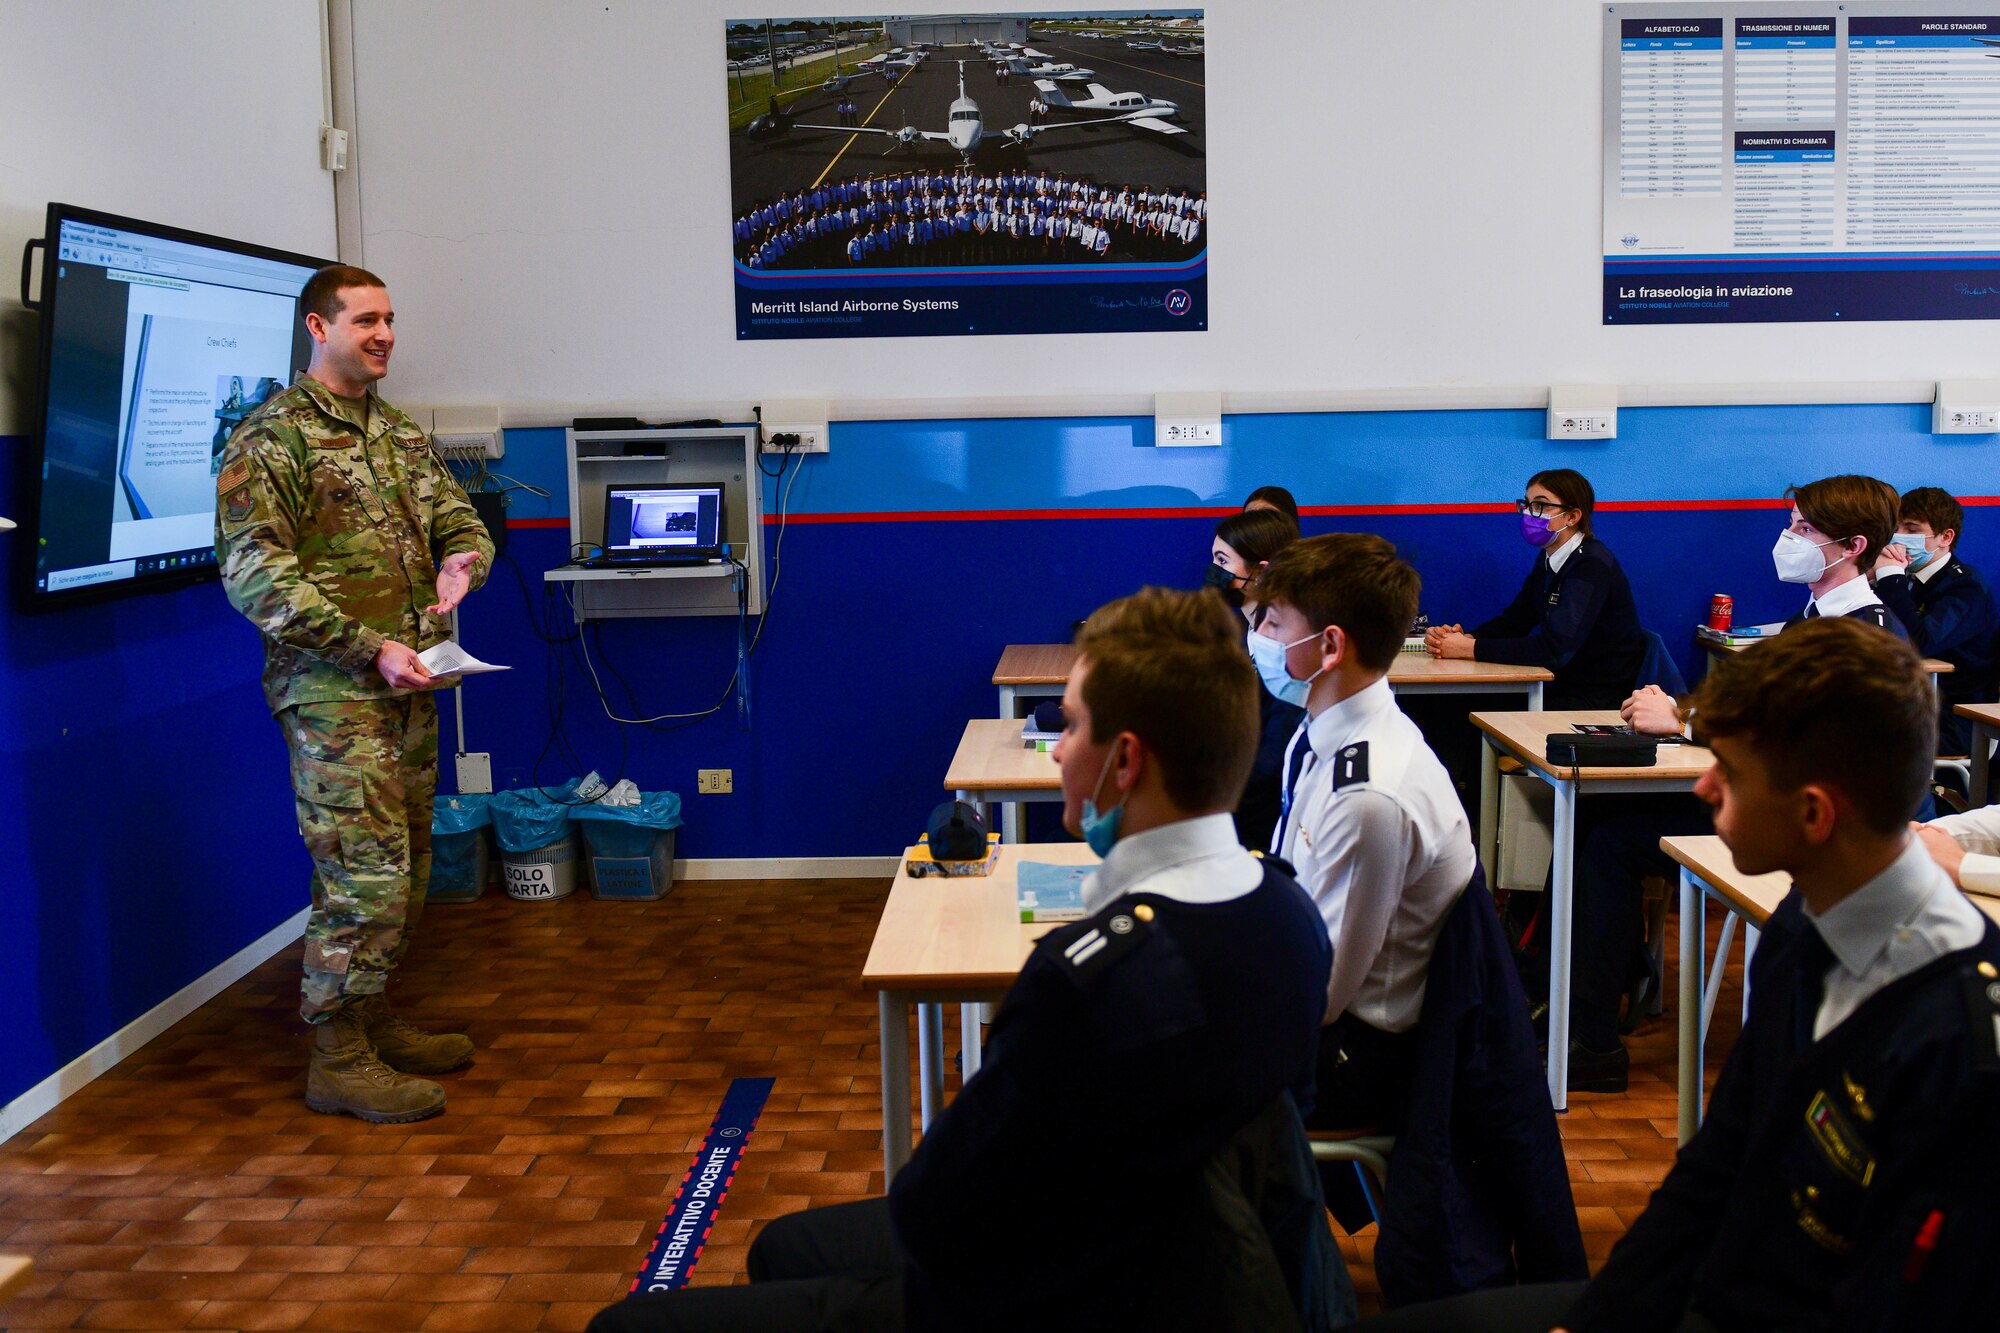 Tech. Sgt. Jacob Thompson, 31st Maintenance Group Quality Assurance inspector, shares his job experiences with high school aeronautical students at the Nobile Aviation college in Udine, Italy, March 8, 2022. A pilot and maintainer from the 31st Fighter Wing and the Italian air force Air Traffic Control Tower commander spoke in front of approximately 60 aeronautical high school students and shared their experiences of being in the military. (U.S. Air Force photo by Senior Airman Brooke Moeder)